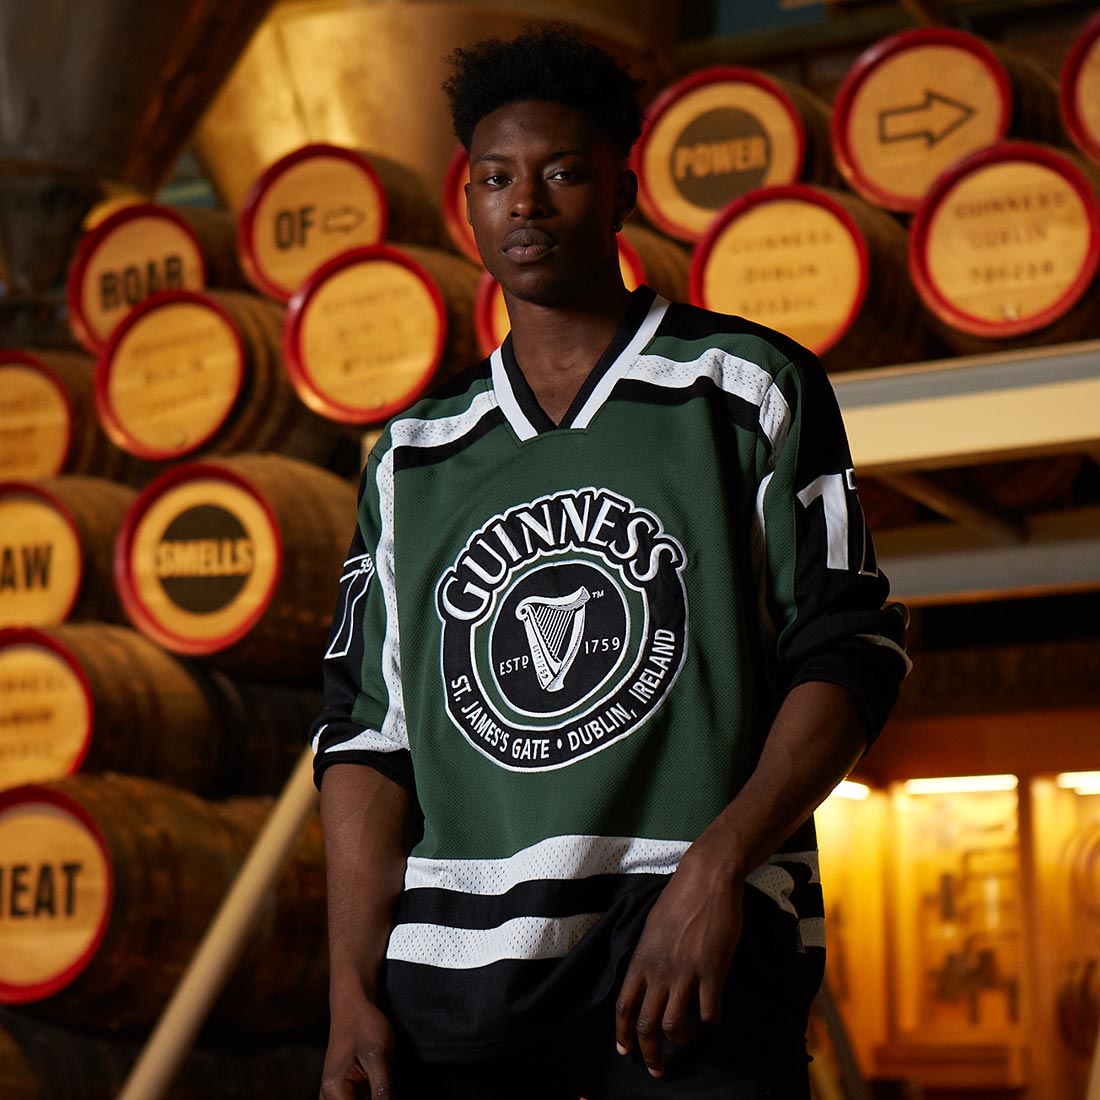 A young man wearing a green and black Guinness hockey jersey made of polyester.